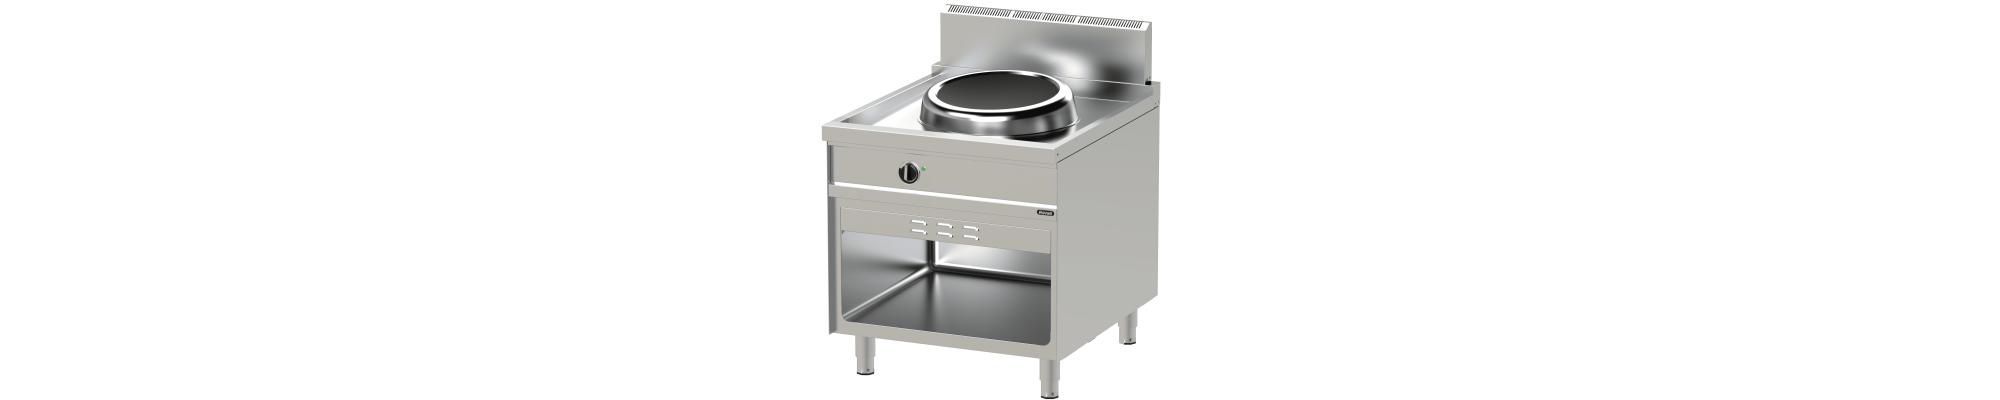 WOK INDUCTION - SERIE 900